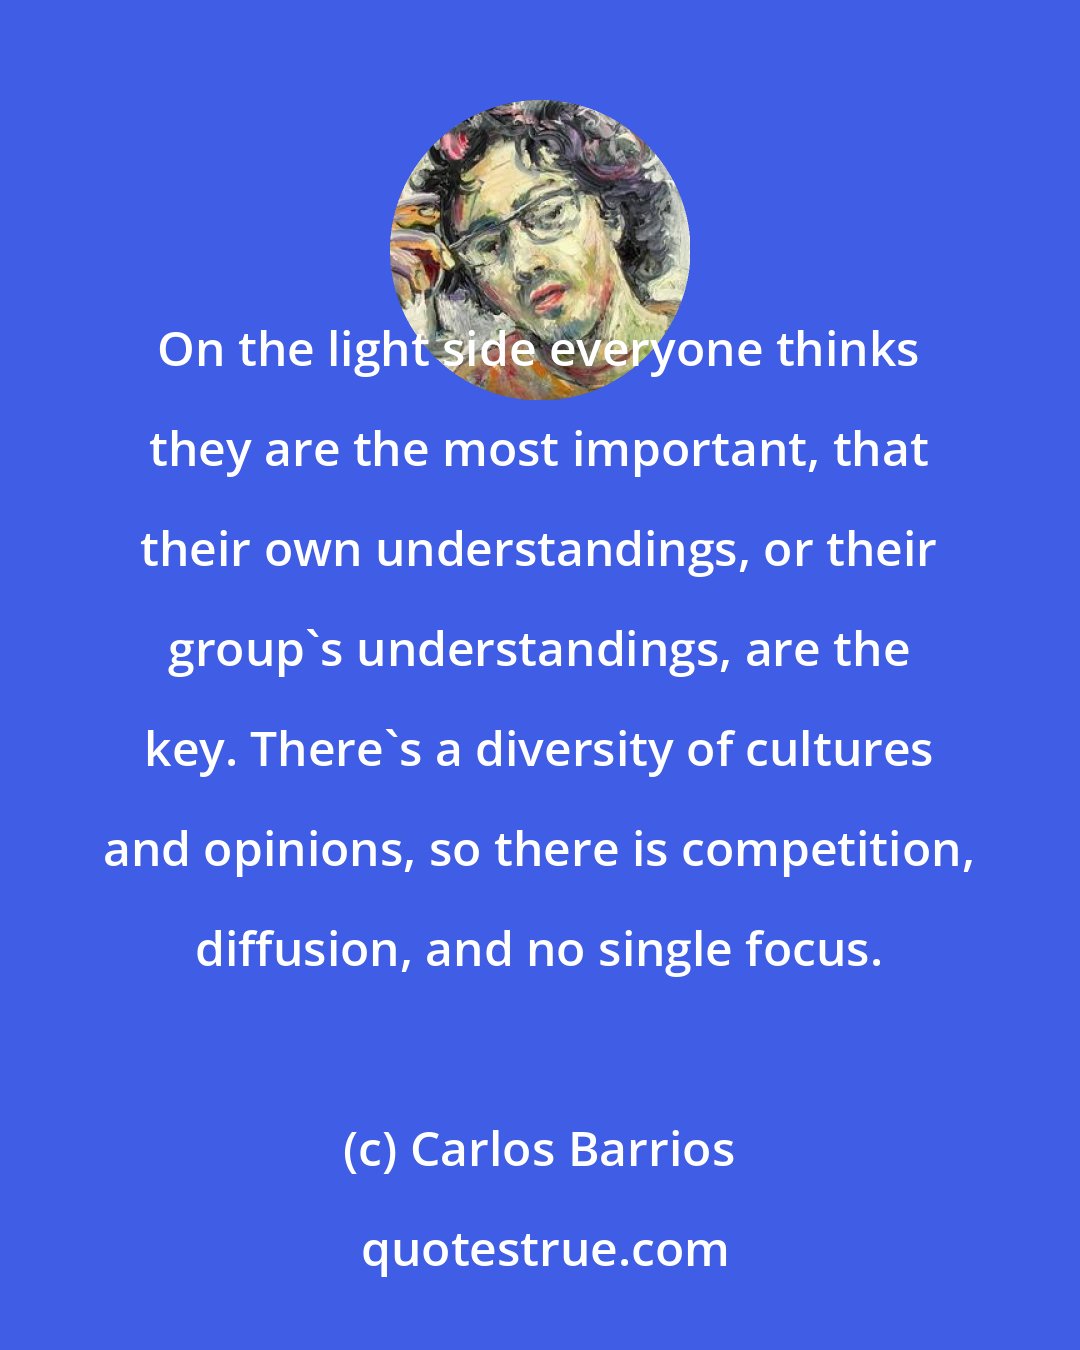 Carlos Barrios: On the light side everyone thinks they are the most important, that their own understandings, or their group's understandings, are the key. There's a diversity of cultures and opinions, so there is competition, diffusion, and no single focus.